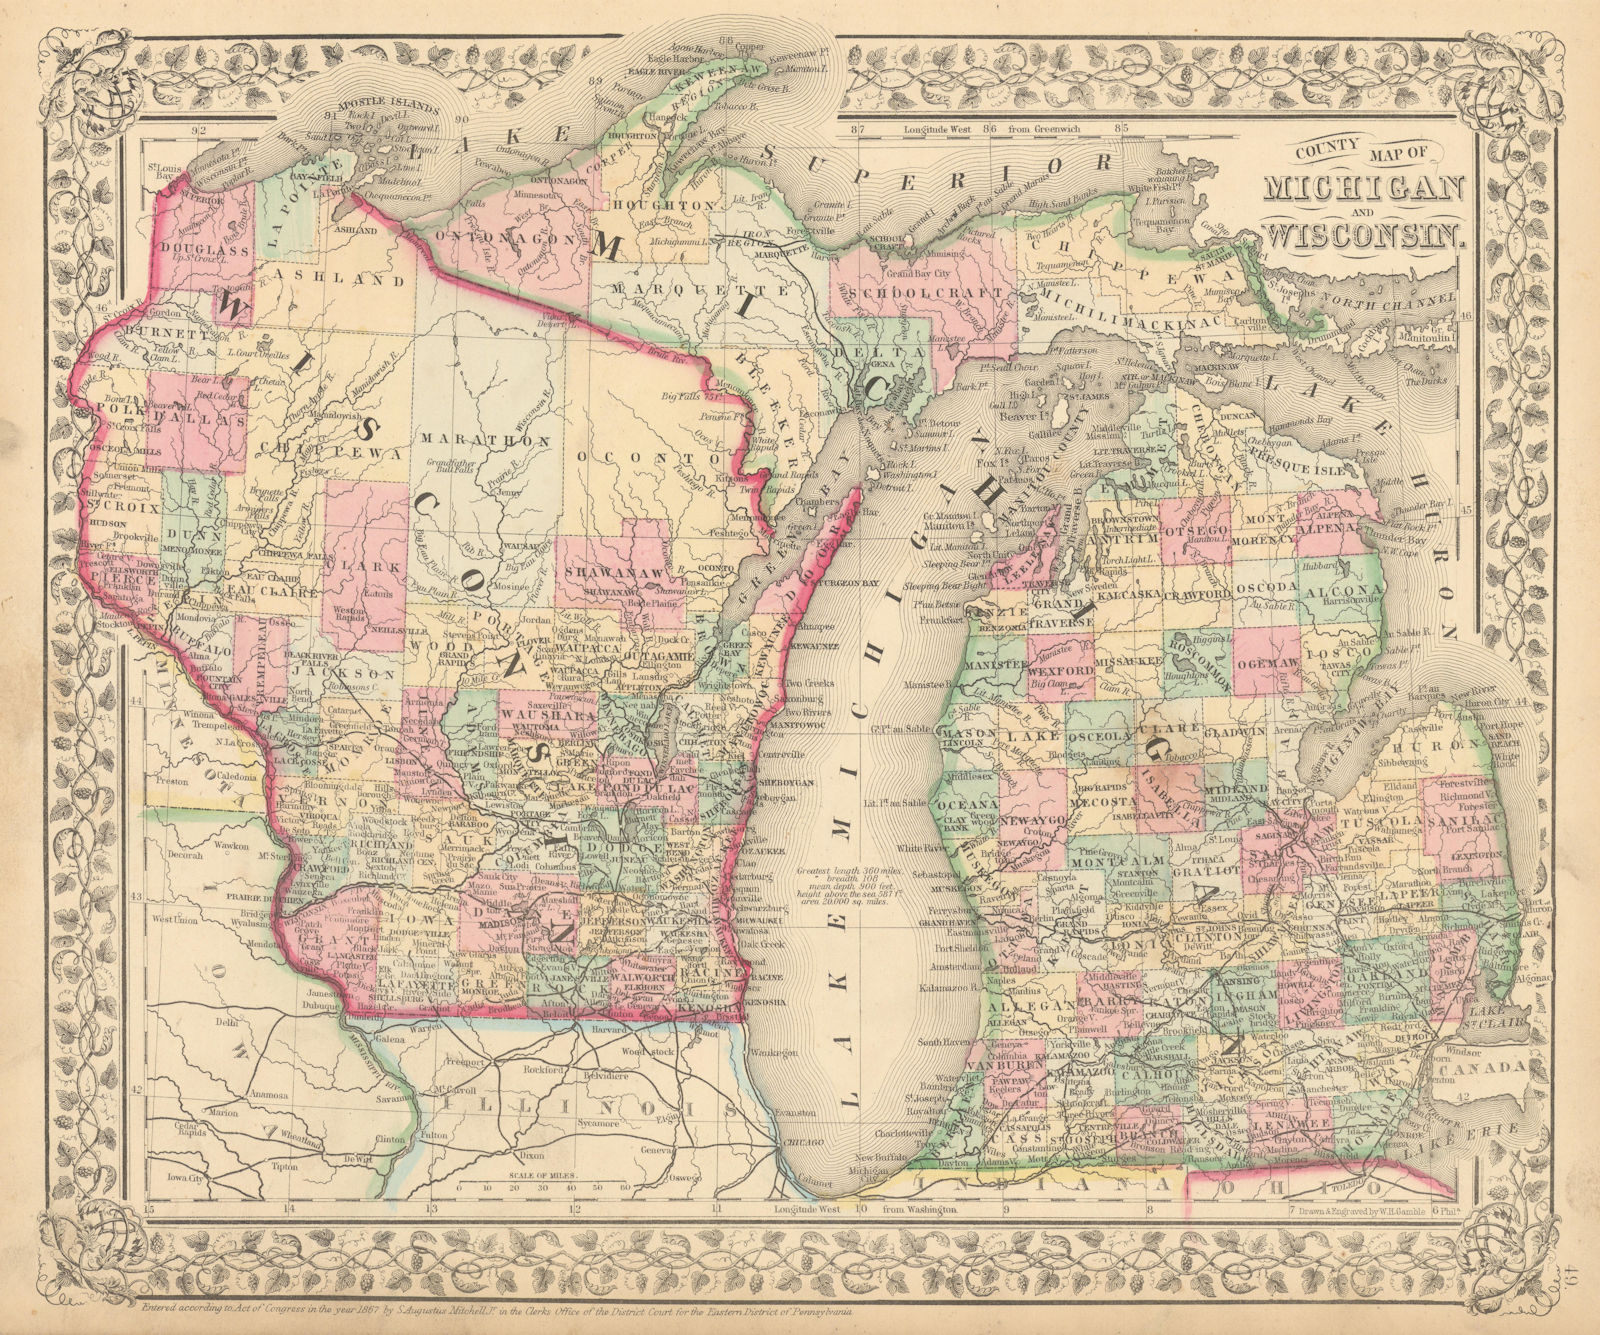 County map of Michigan and Wisconsin by S. Augustus Mitchell. State map 1869